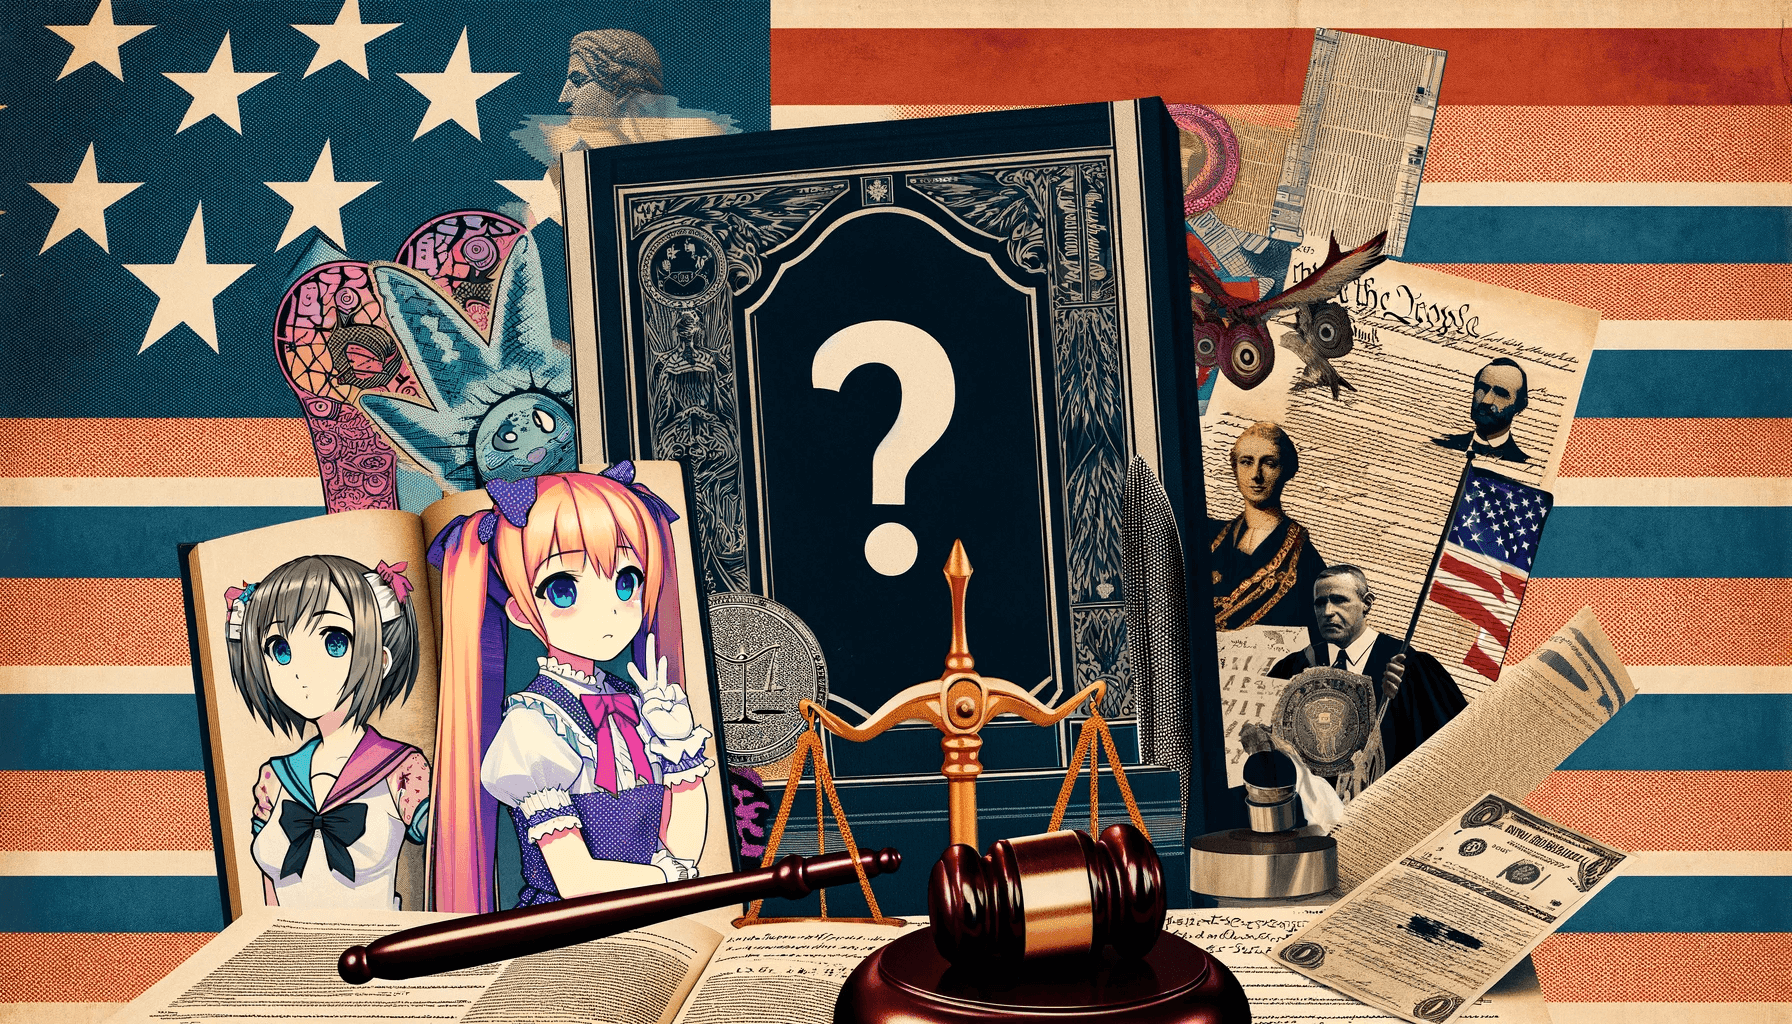 Is Lolicon Illegal in the US?